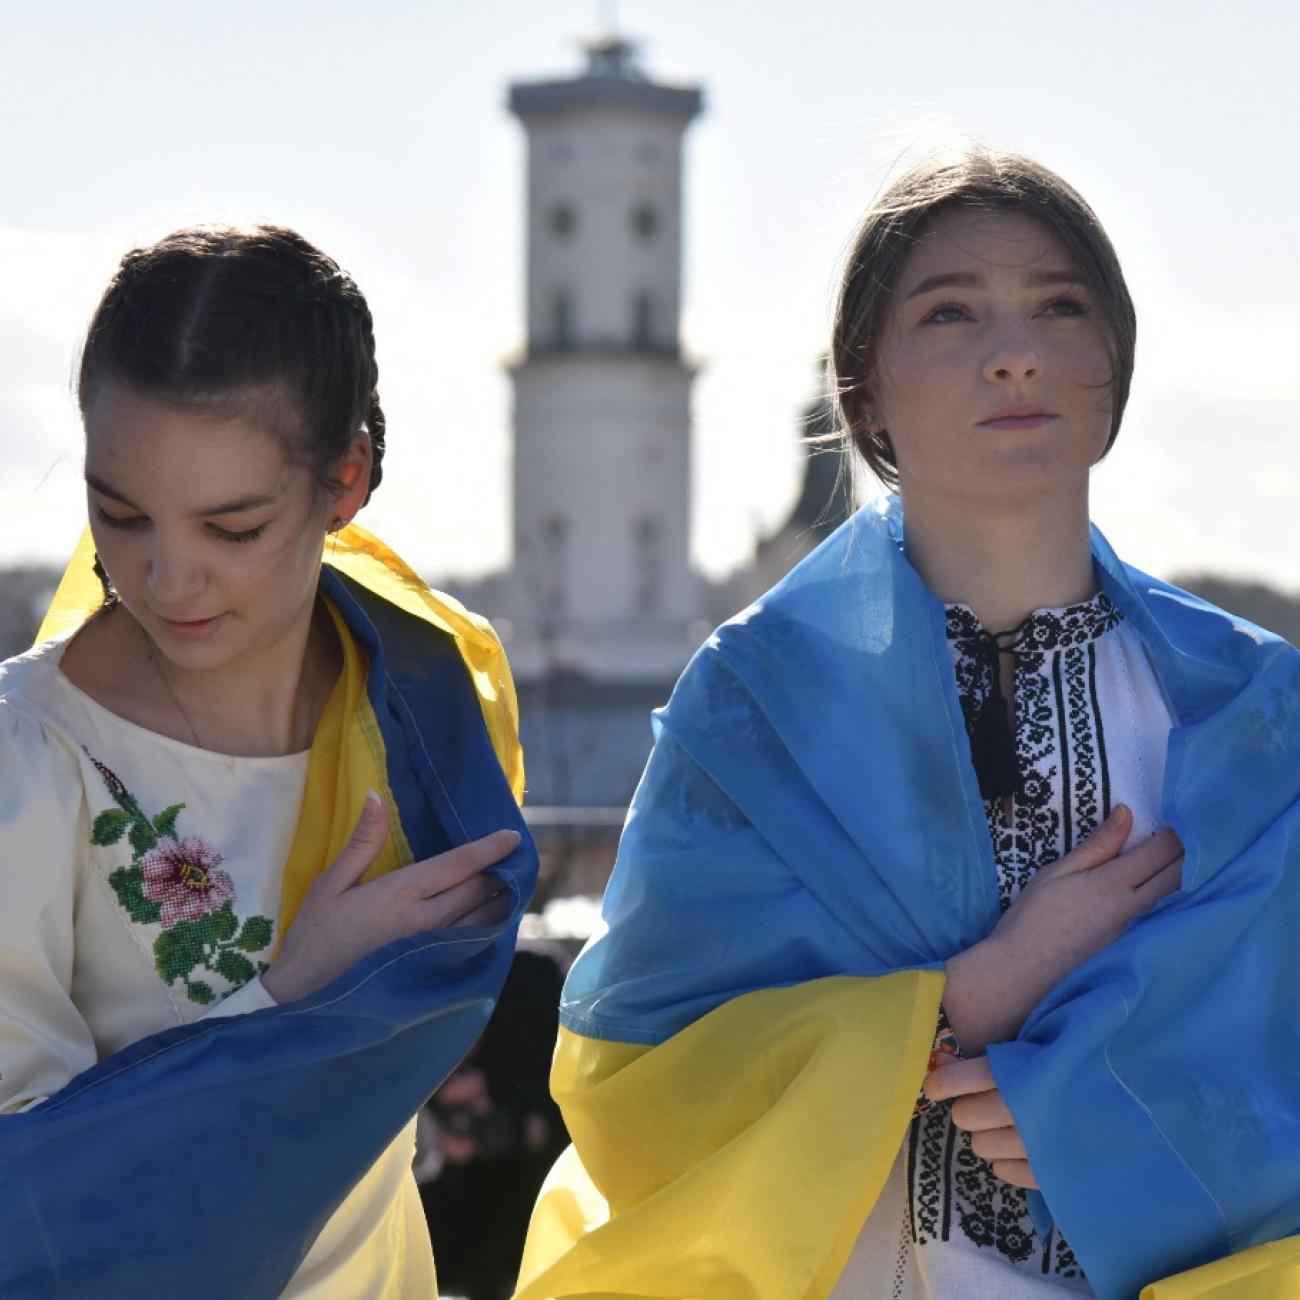 Two girls stand in Lviv, Ukraine wearing traditional Ukrainian blouses and wrapped in the blue and yellow Ukrainian flag